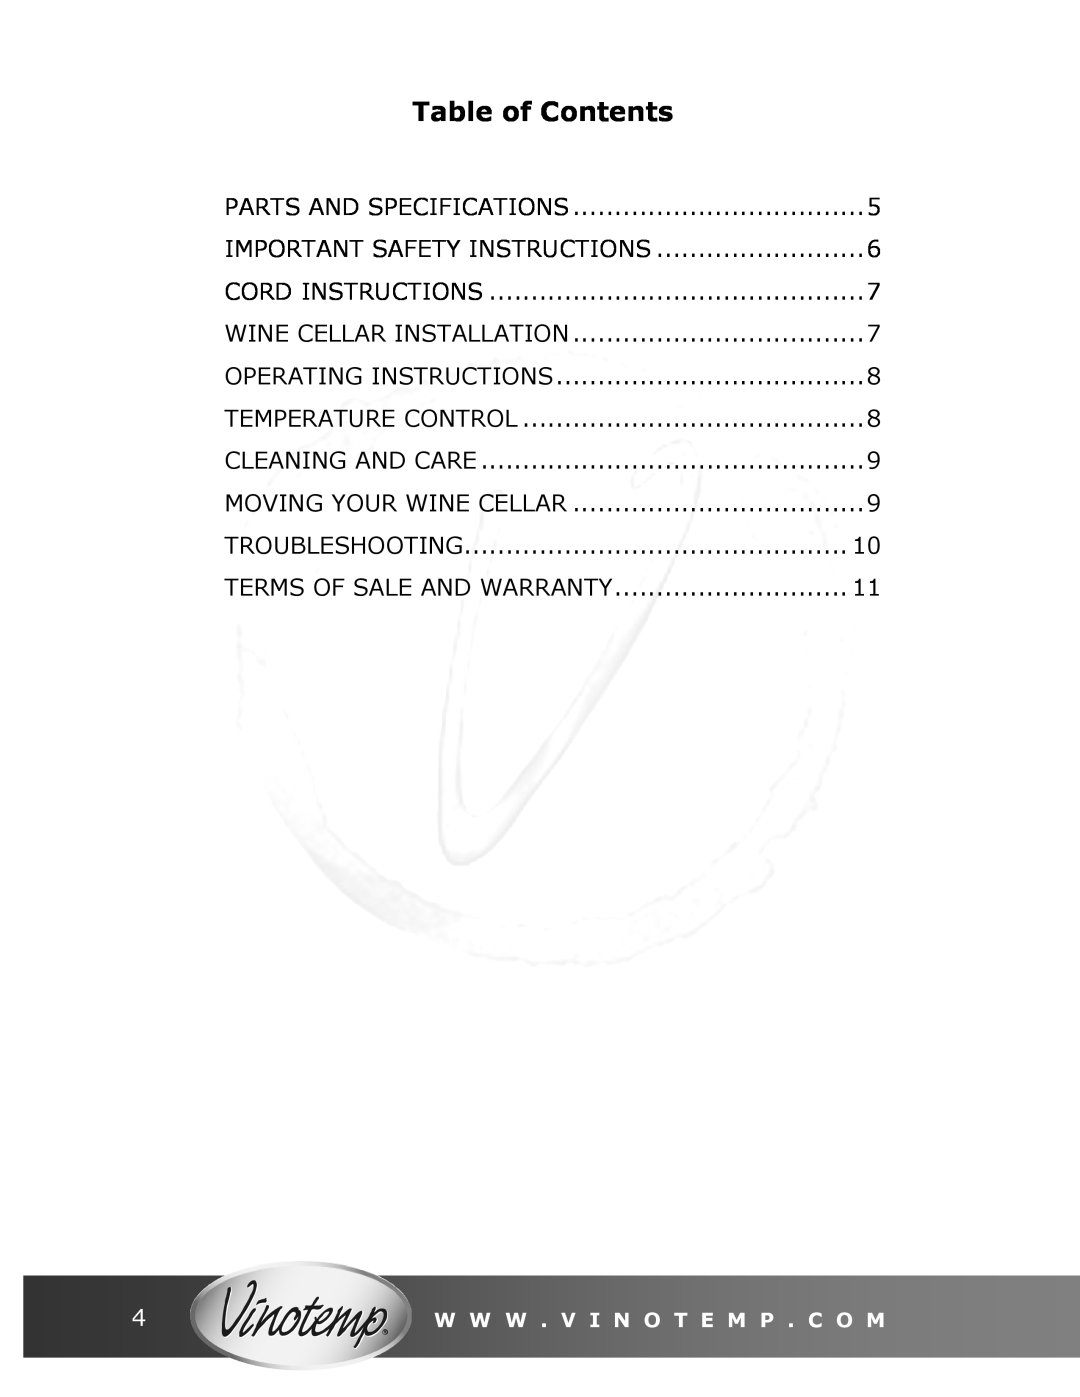 Vinotemp VT-34 TS owner manual Table of Contents 